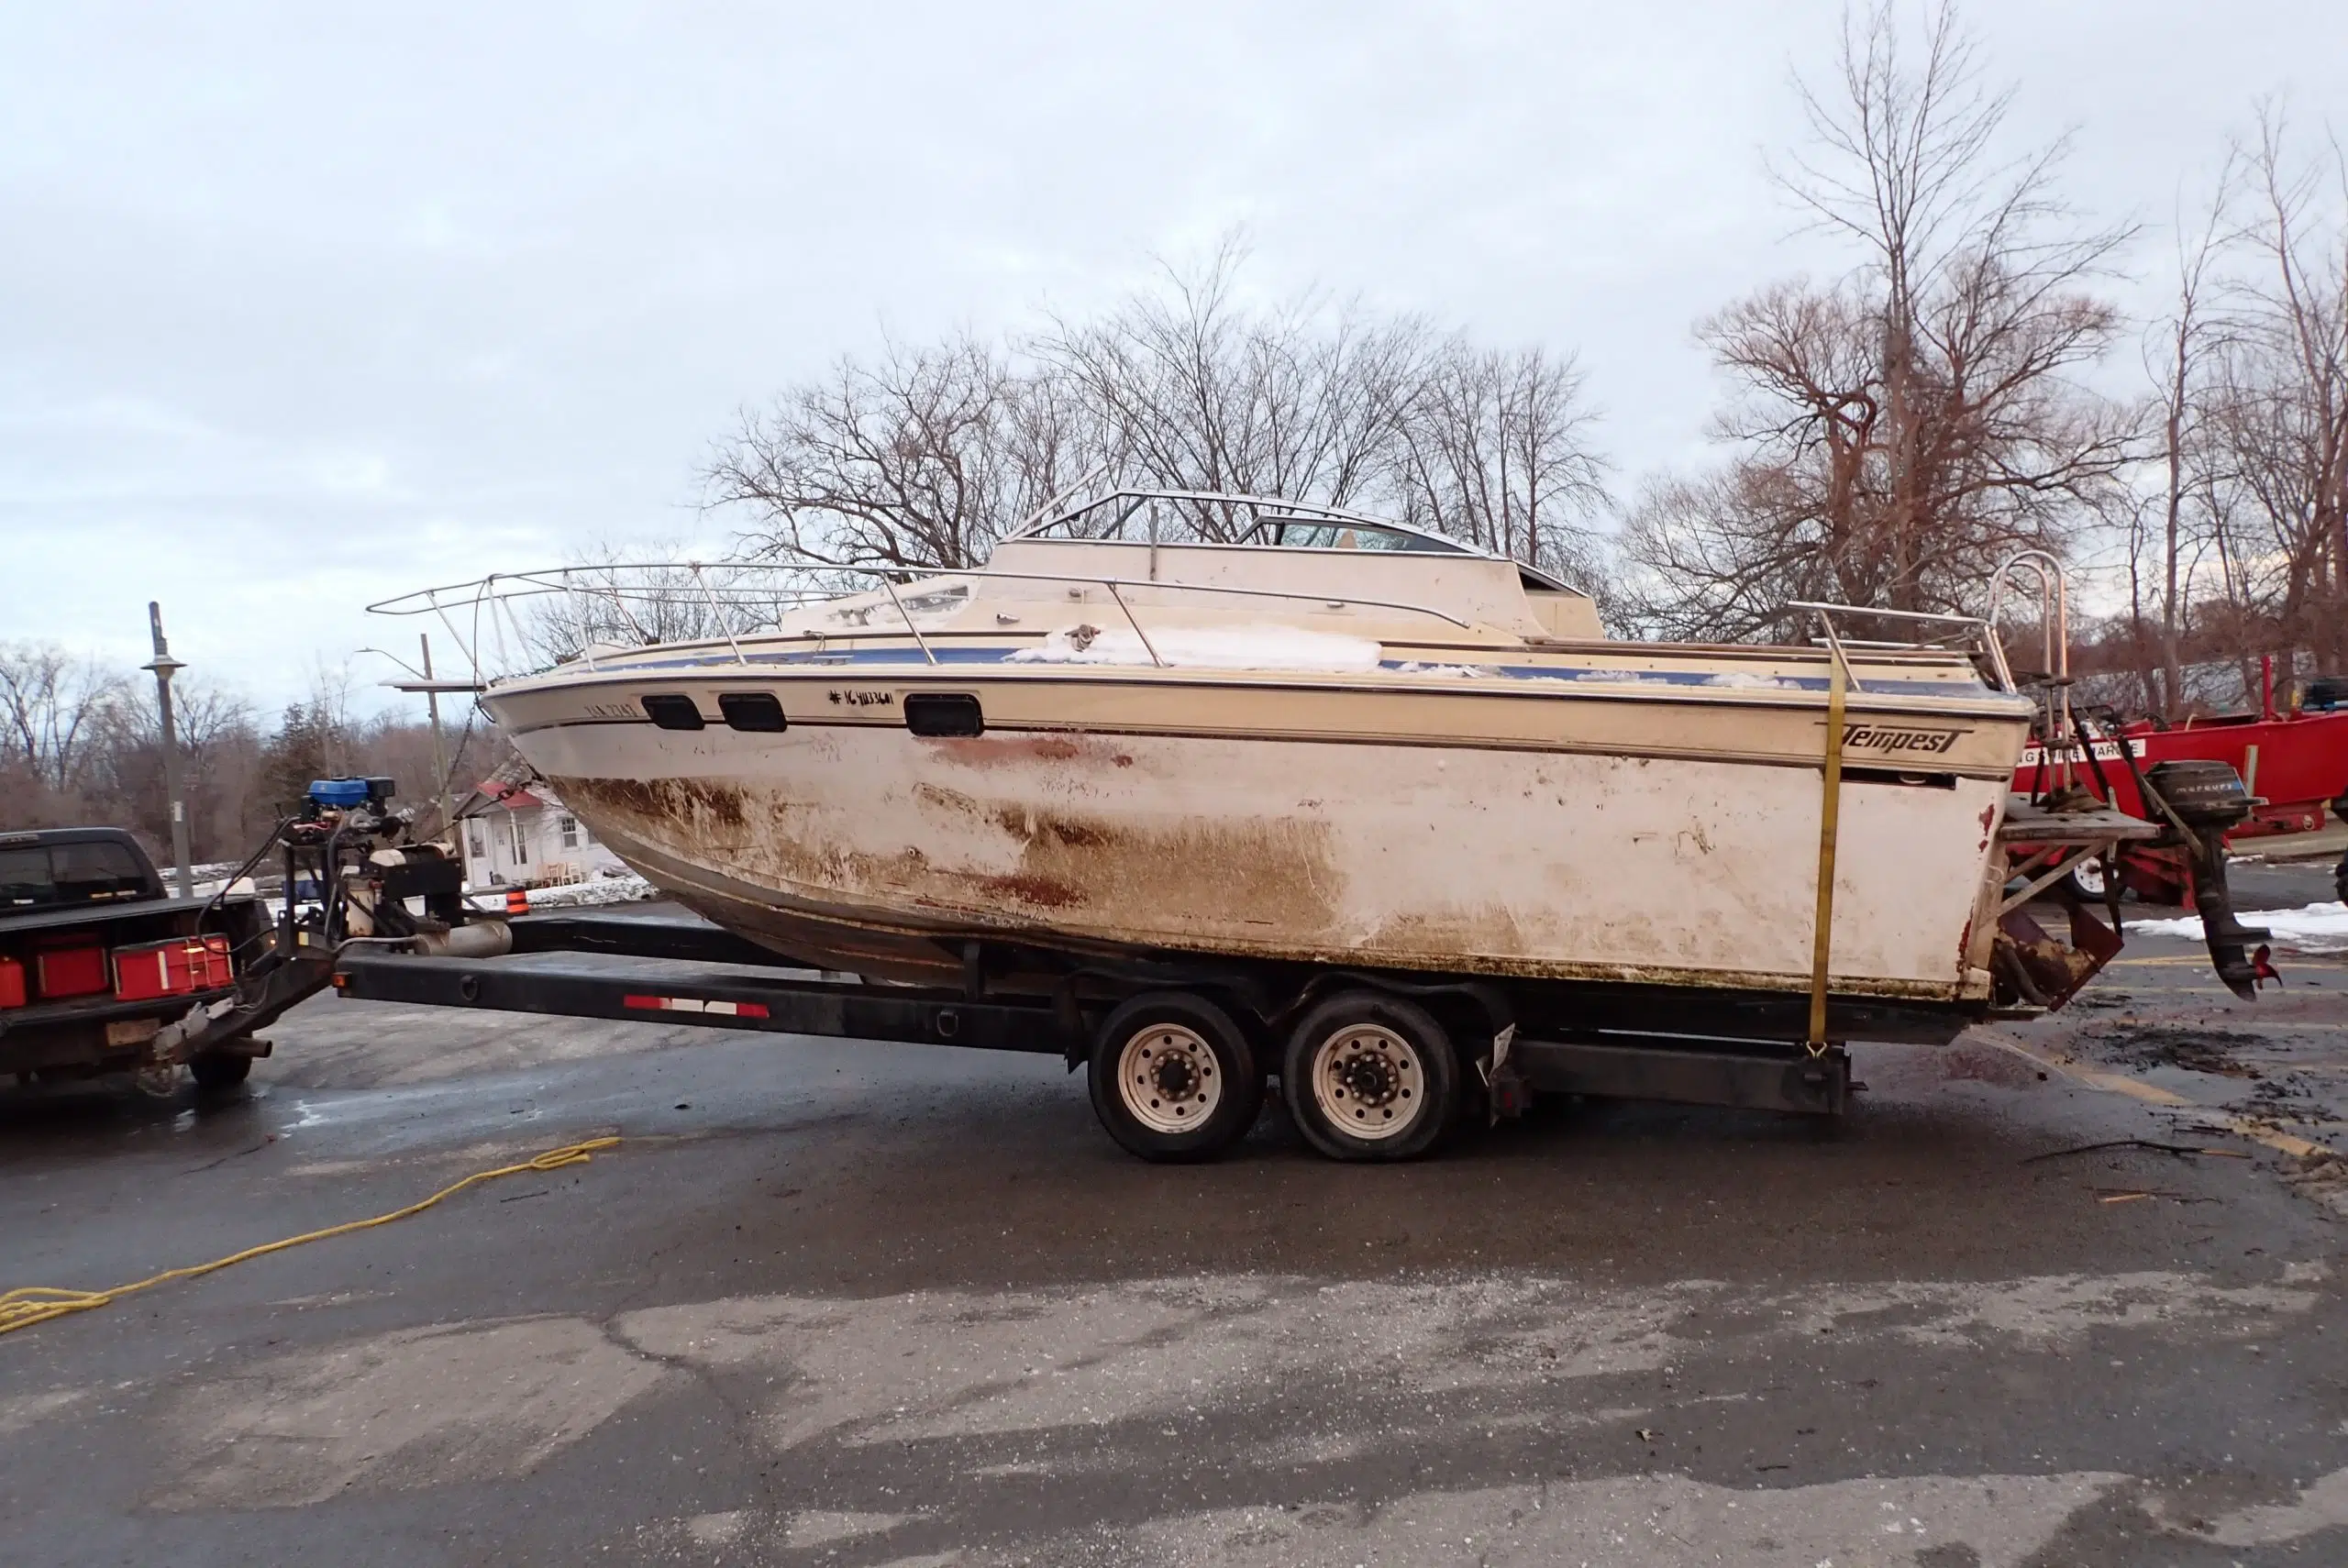 RELEASE: Intention to dispose of boat wreck